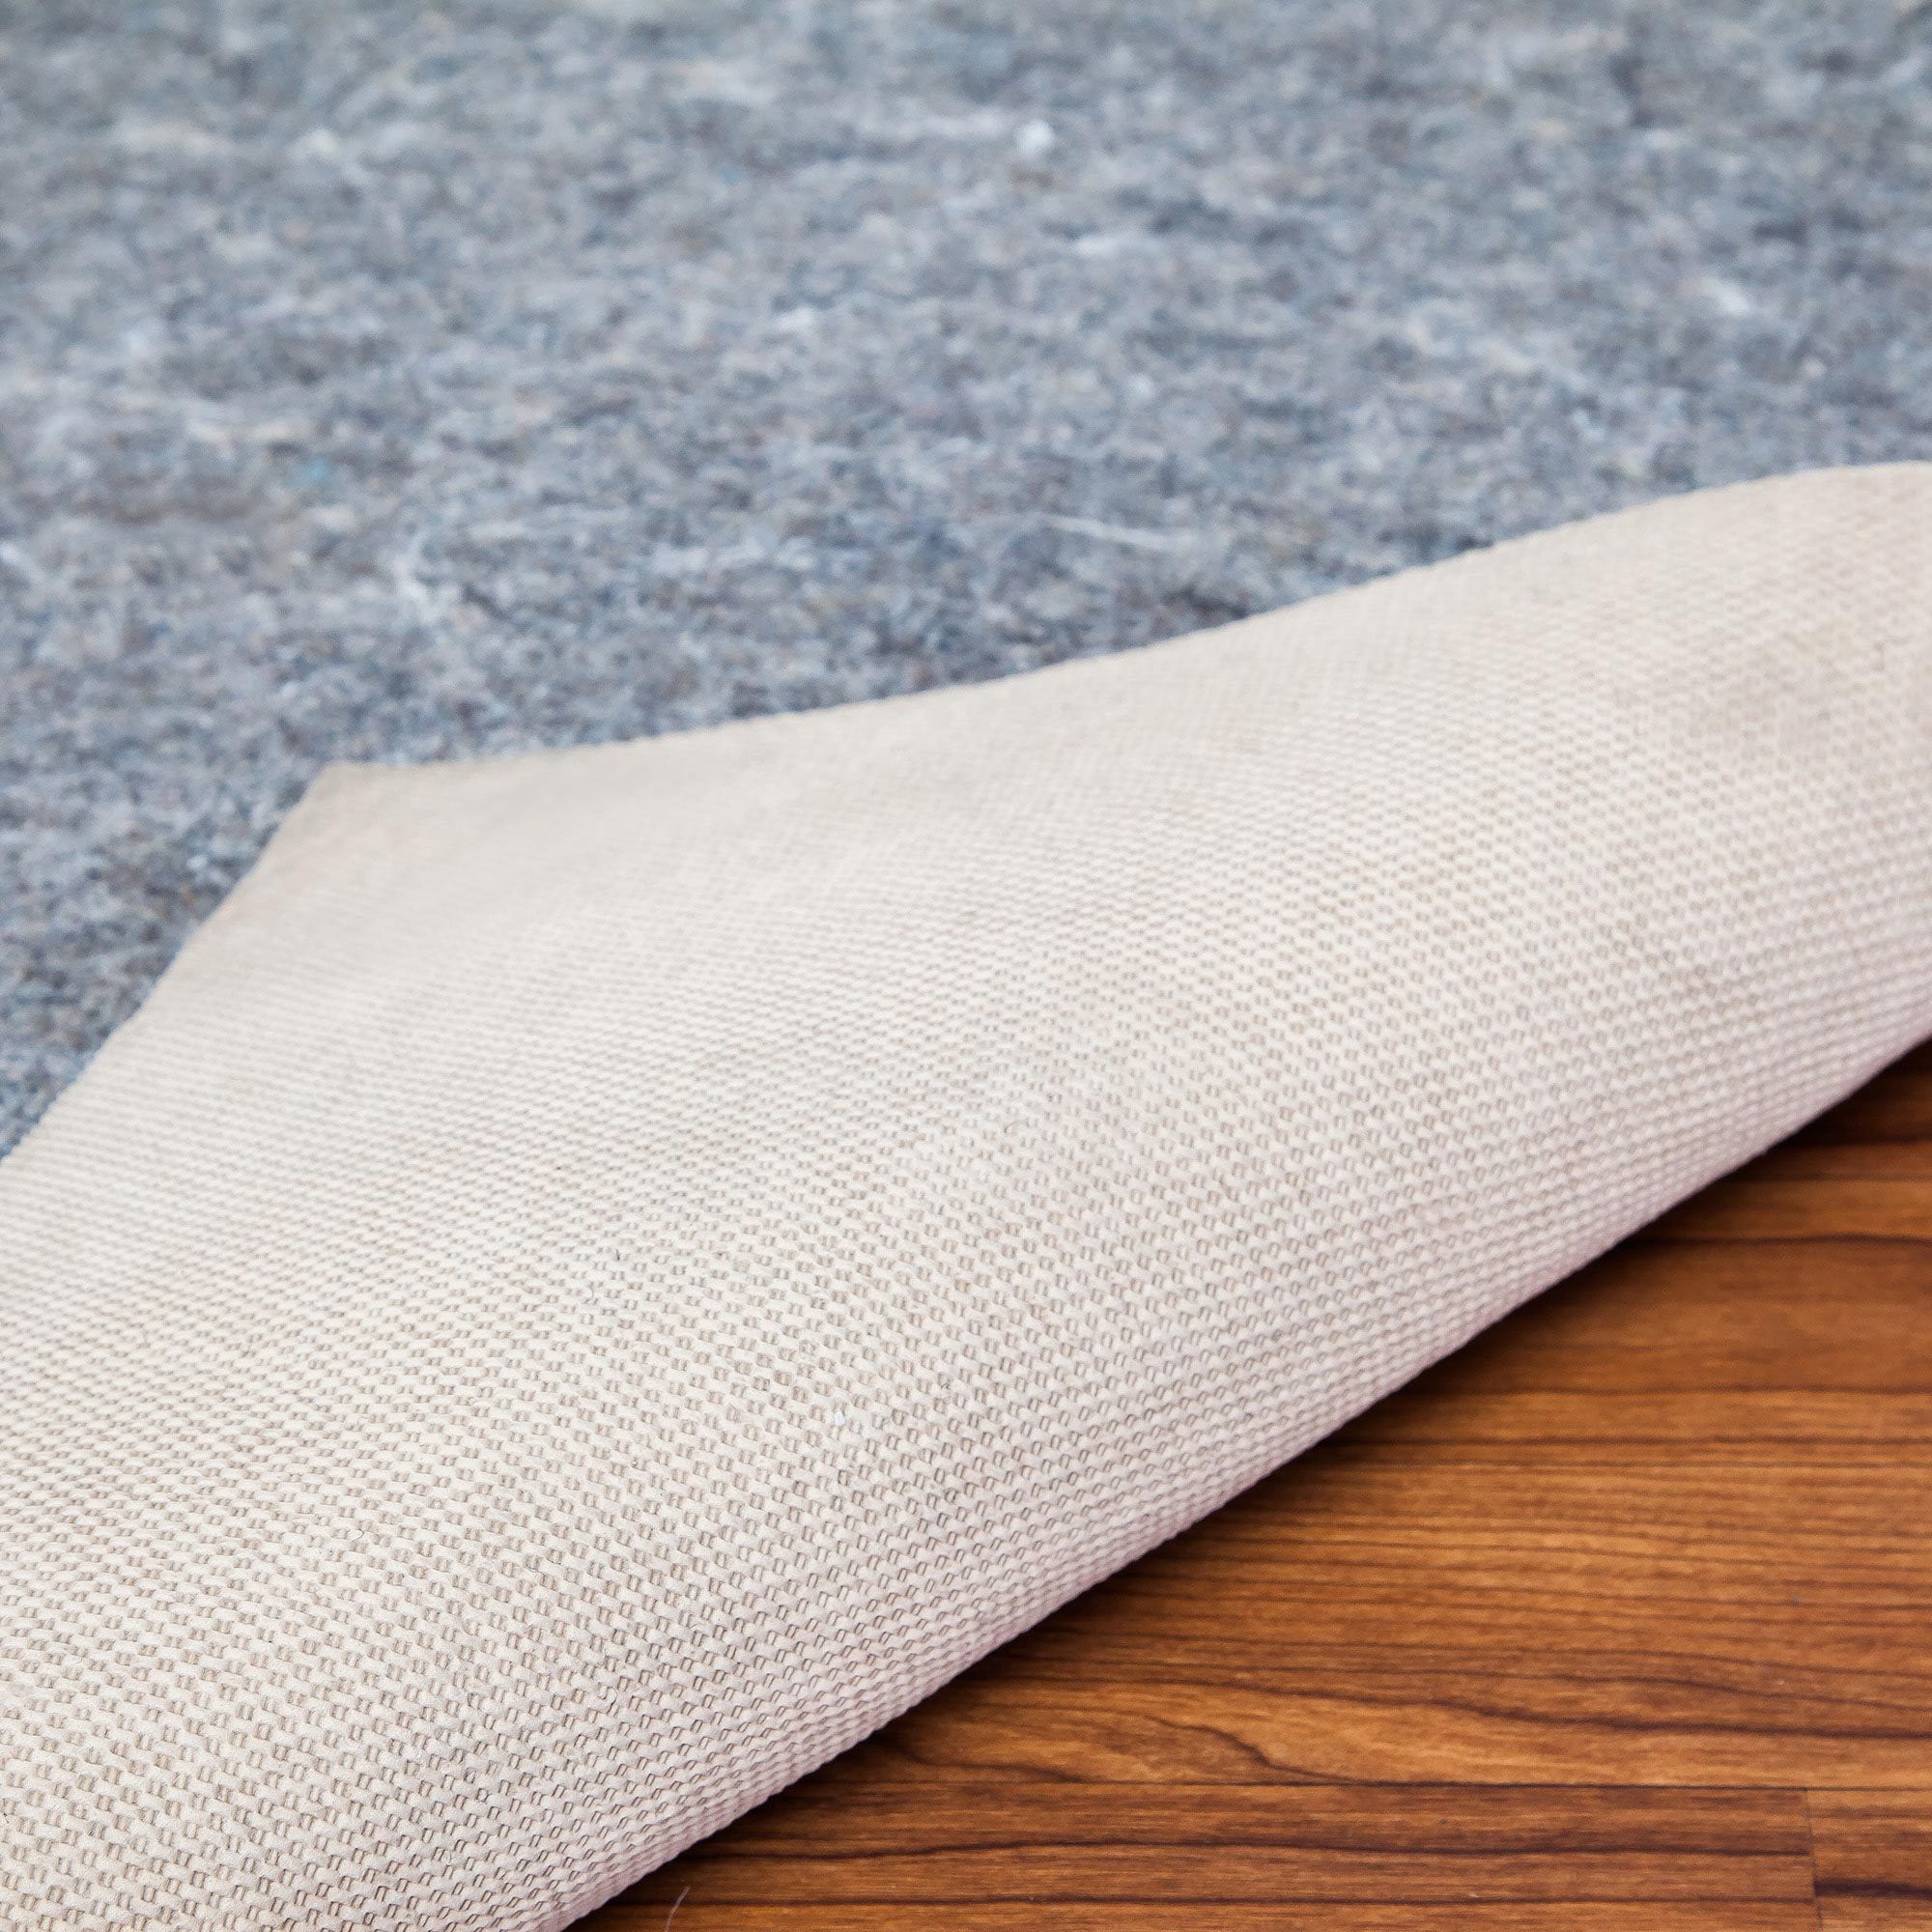 Natural Rubber Non Slip Rug Pad - Ivory (4' x 6') - Rug Pad - Recycled Polyester - - Rug Pad